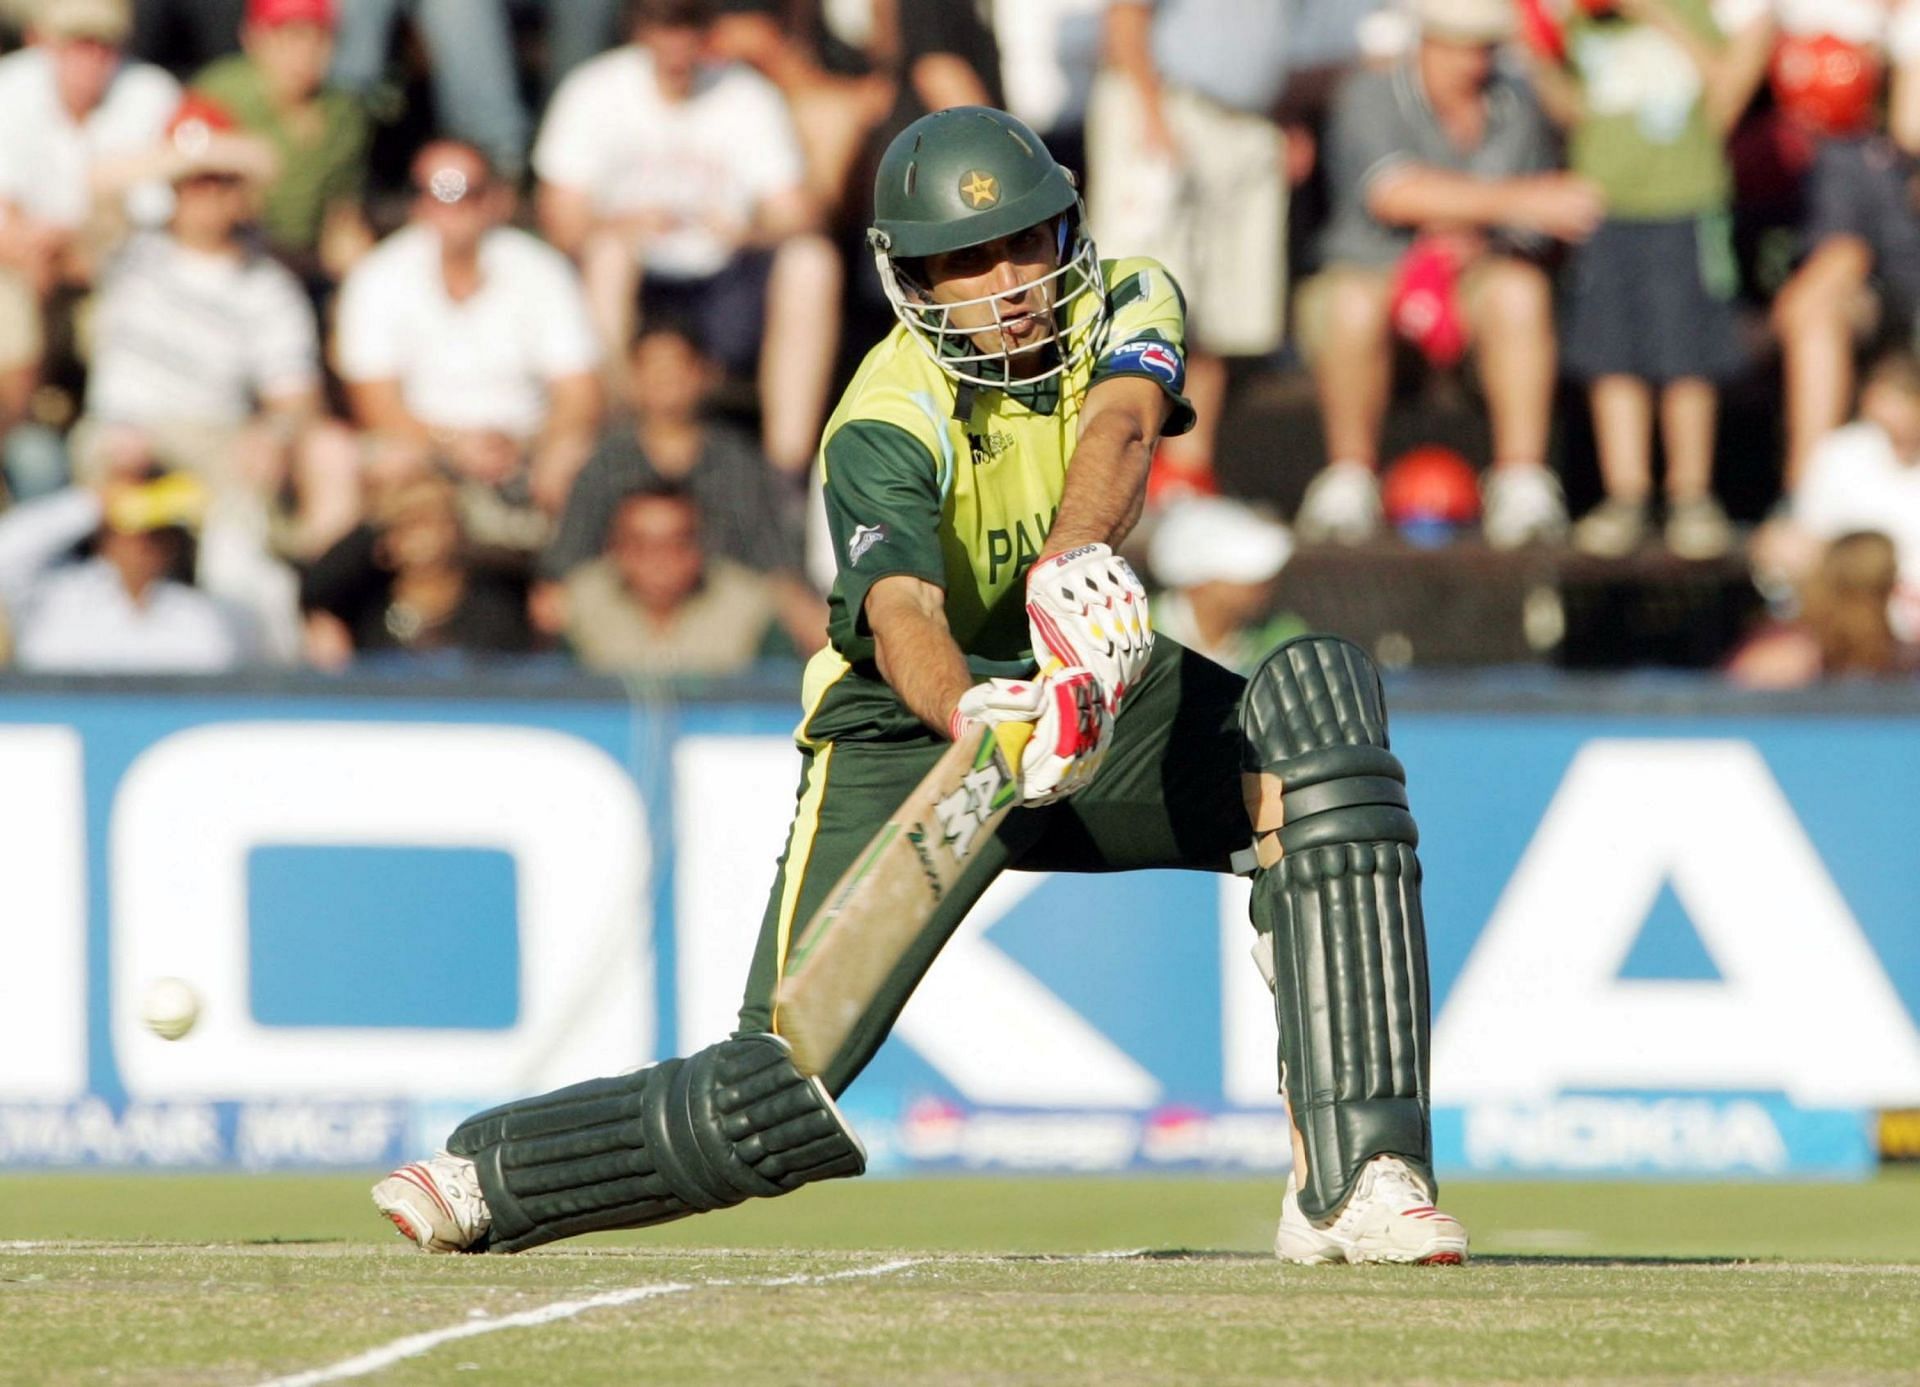 Misbah-ul-Haq was the highest scorer for Pakistan in the tournament